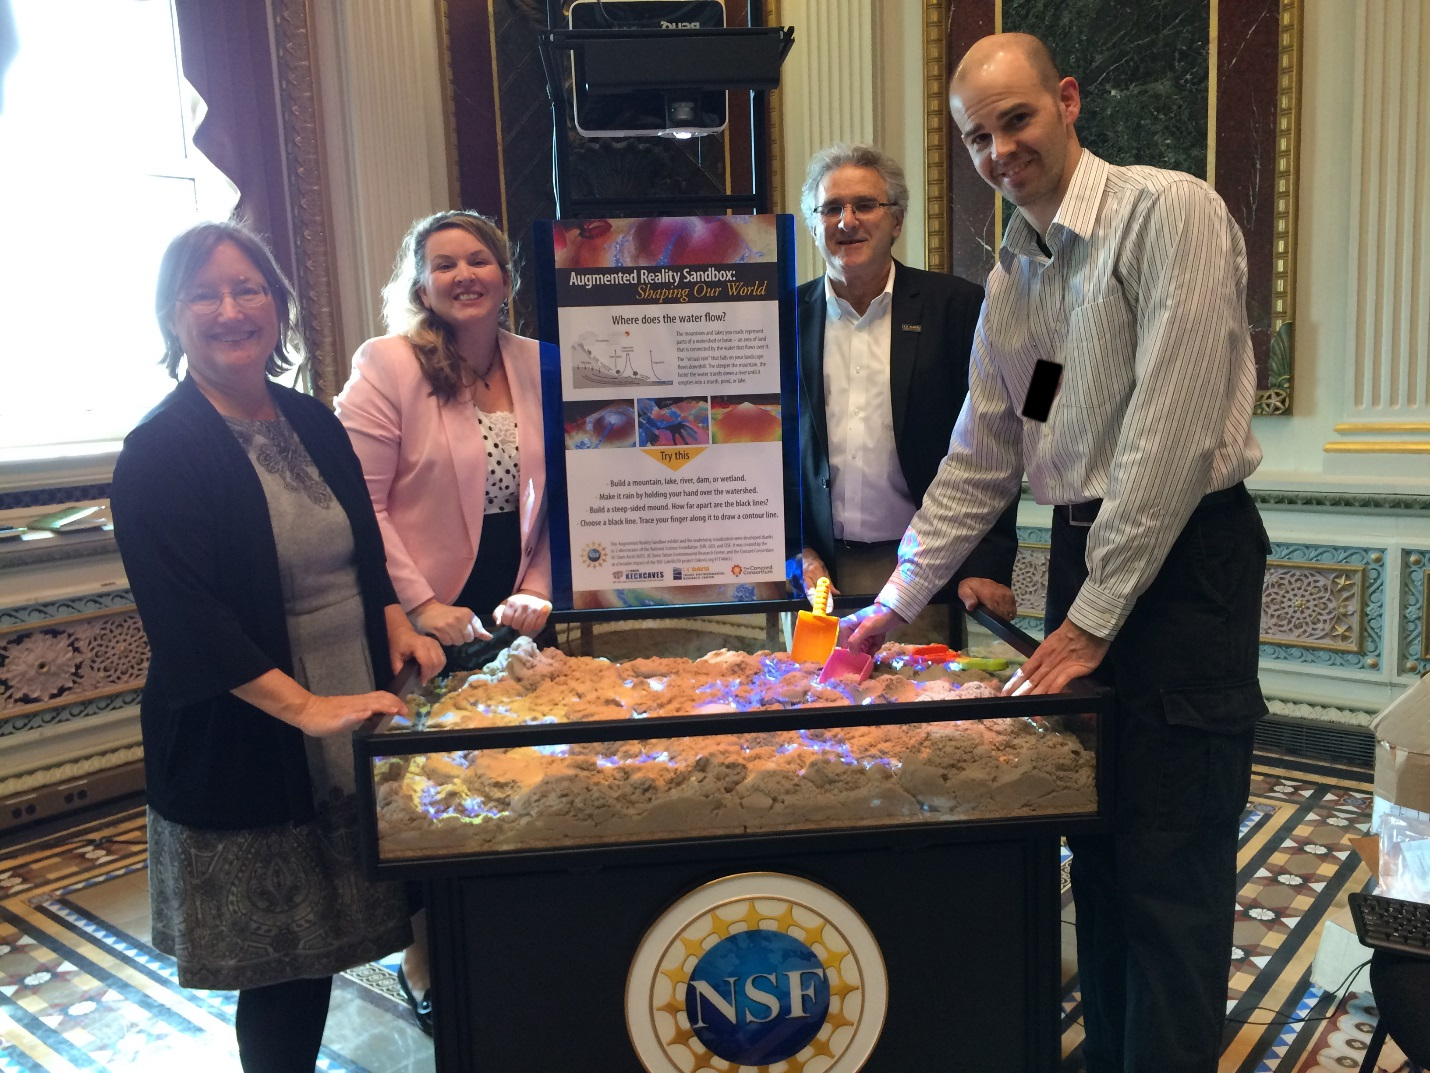 New commercial-grade AR Sandbox model at the White House Water Summit, 03/22/2016. Left to right: Dr. Louise H. Kellogg, Neysa Call (Legislative Aide and Grants Director for Senate Democratic leader Harry Reid), Dr. S. Geoffrey Schladow, Dr. Oliver Kreylos. Photo credit: Terry Davies, National Science Foundation.